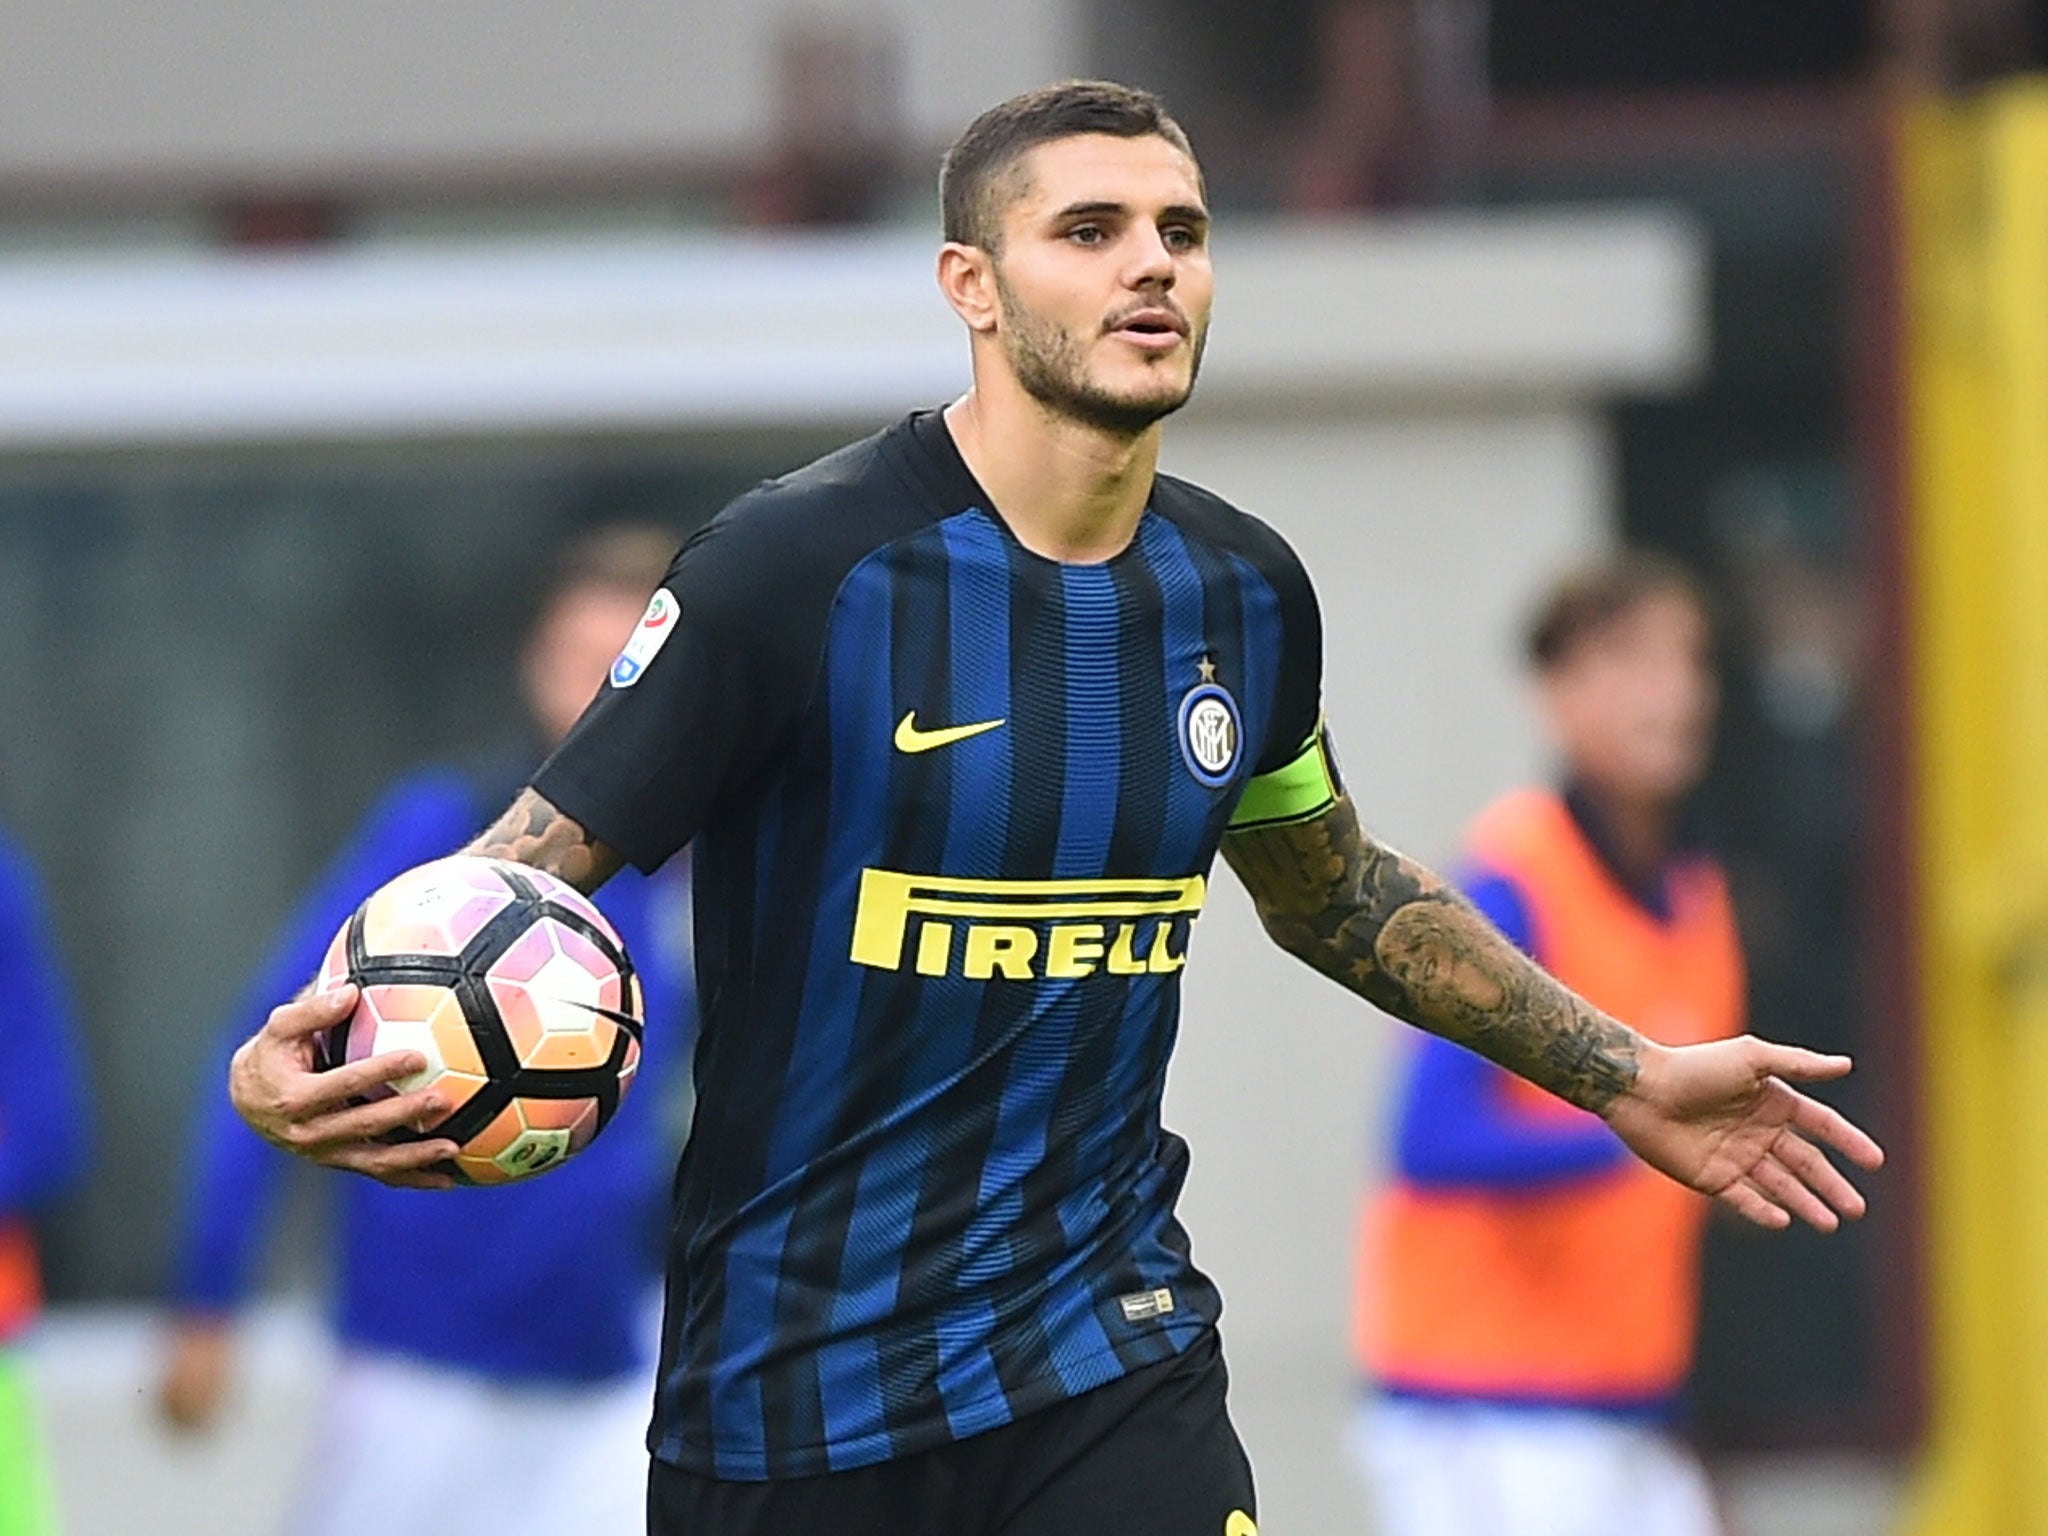 Mauro Icardi has been ostracised by his own fans